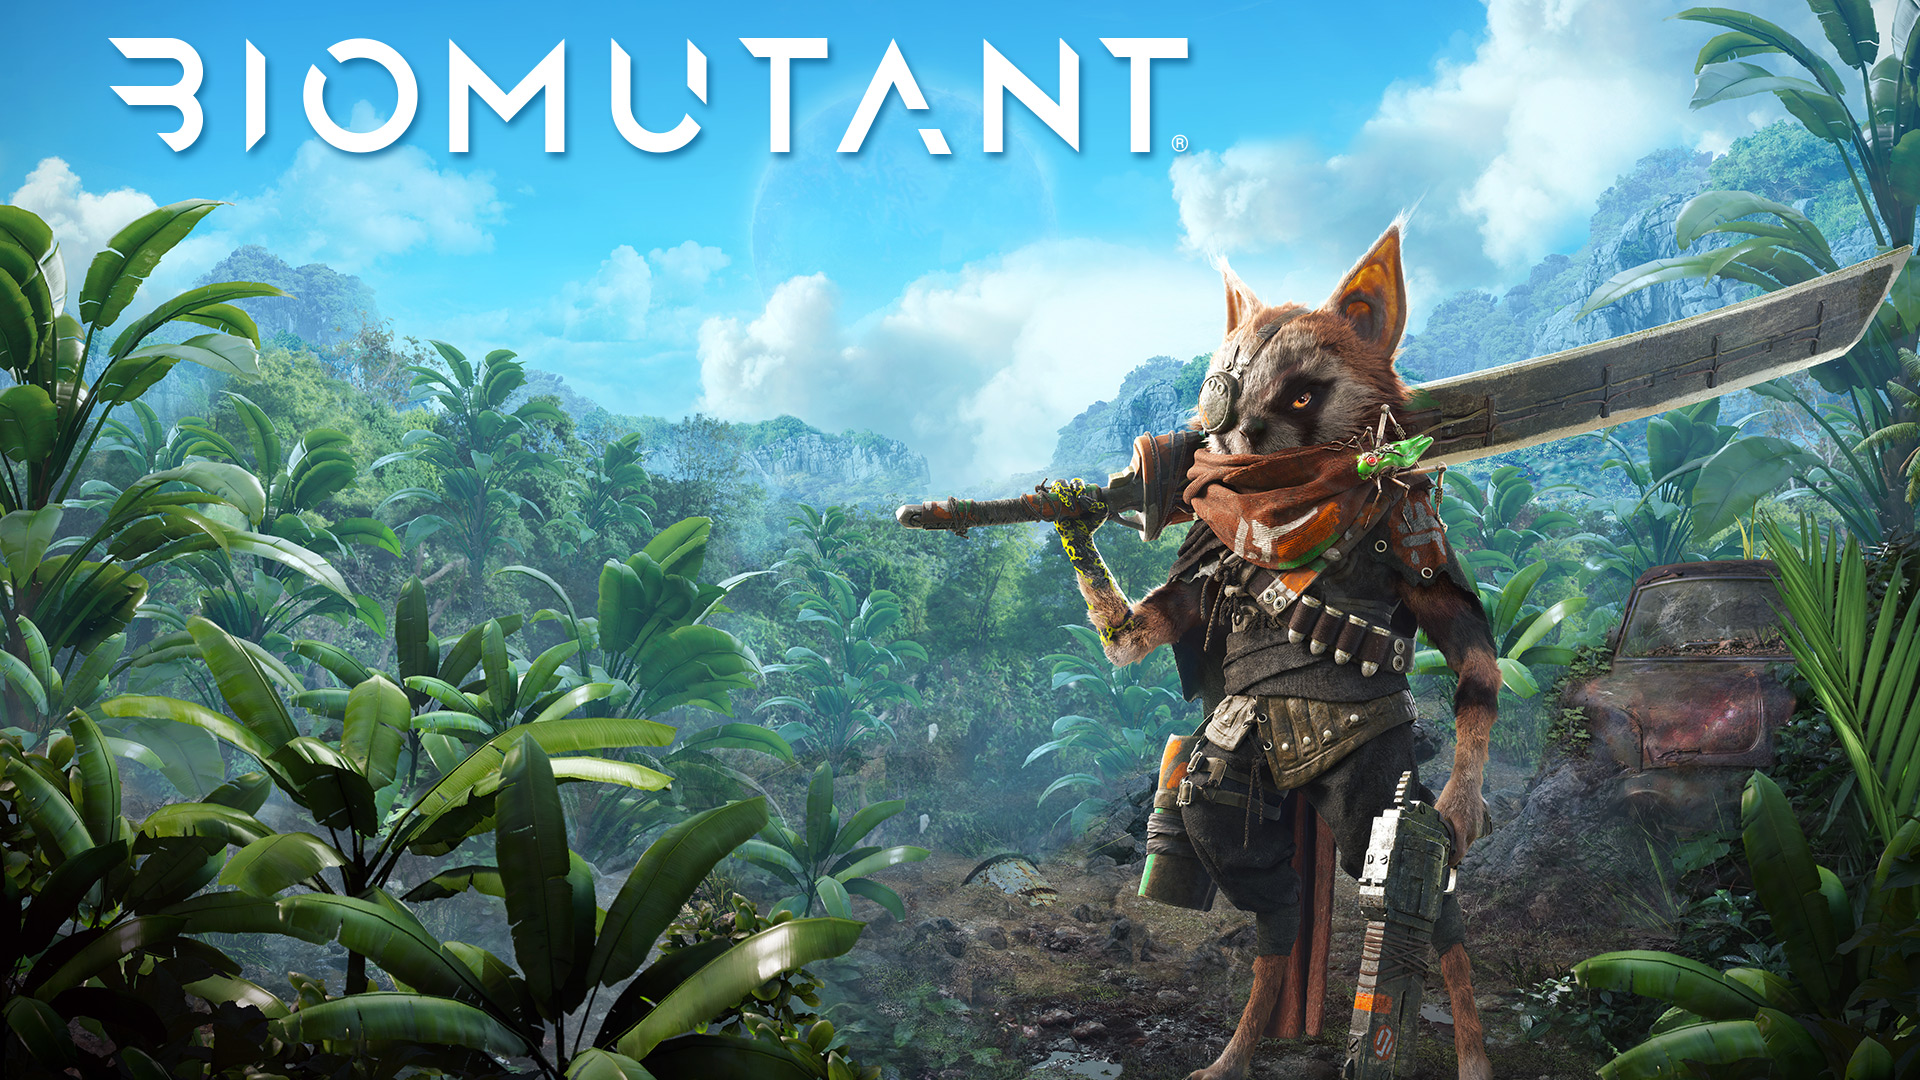 Biomutant is heading to the Nintendo Switch